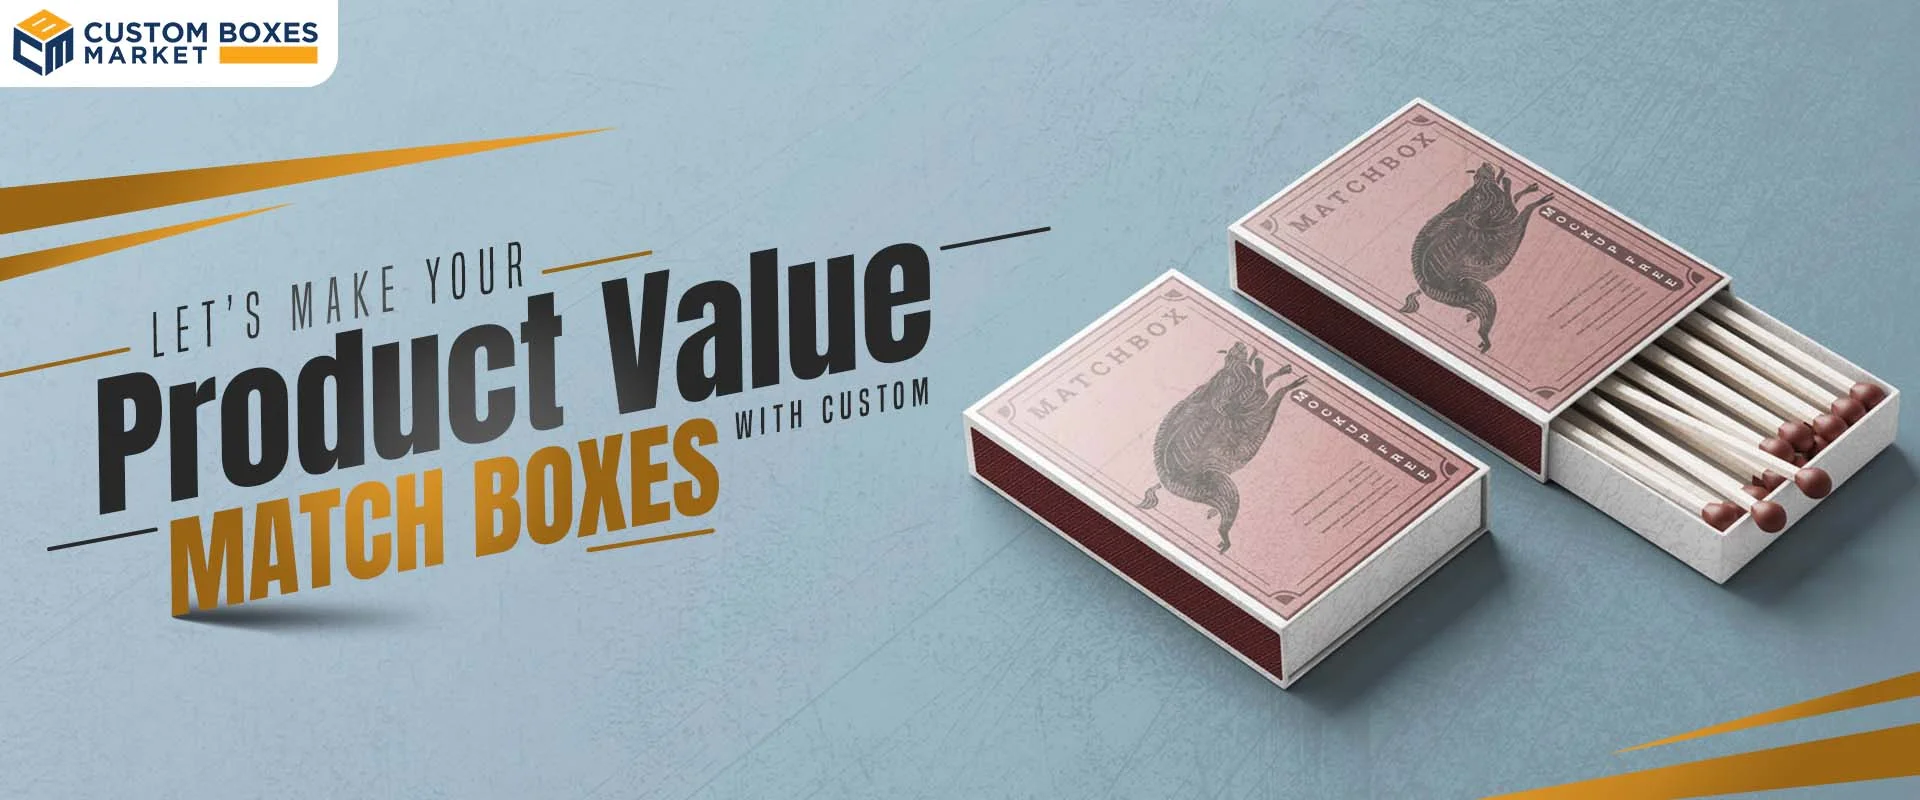 Let’s Make Your Product Values With Custom Match Boxes